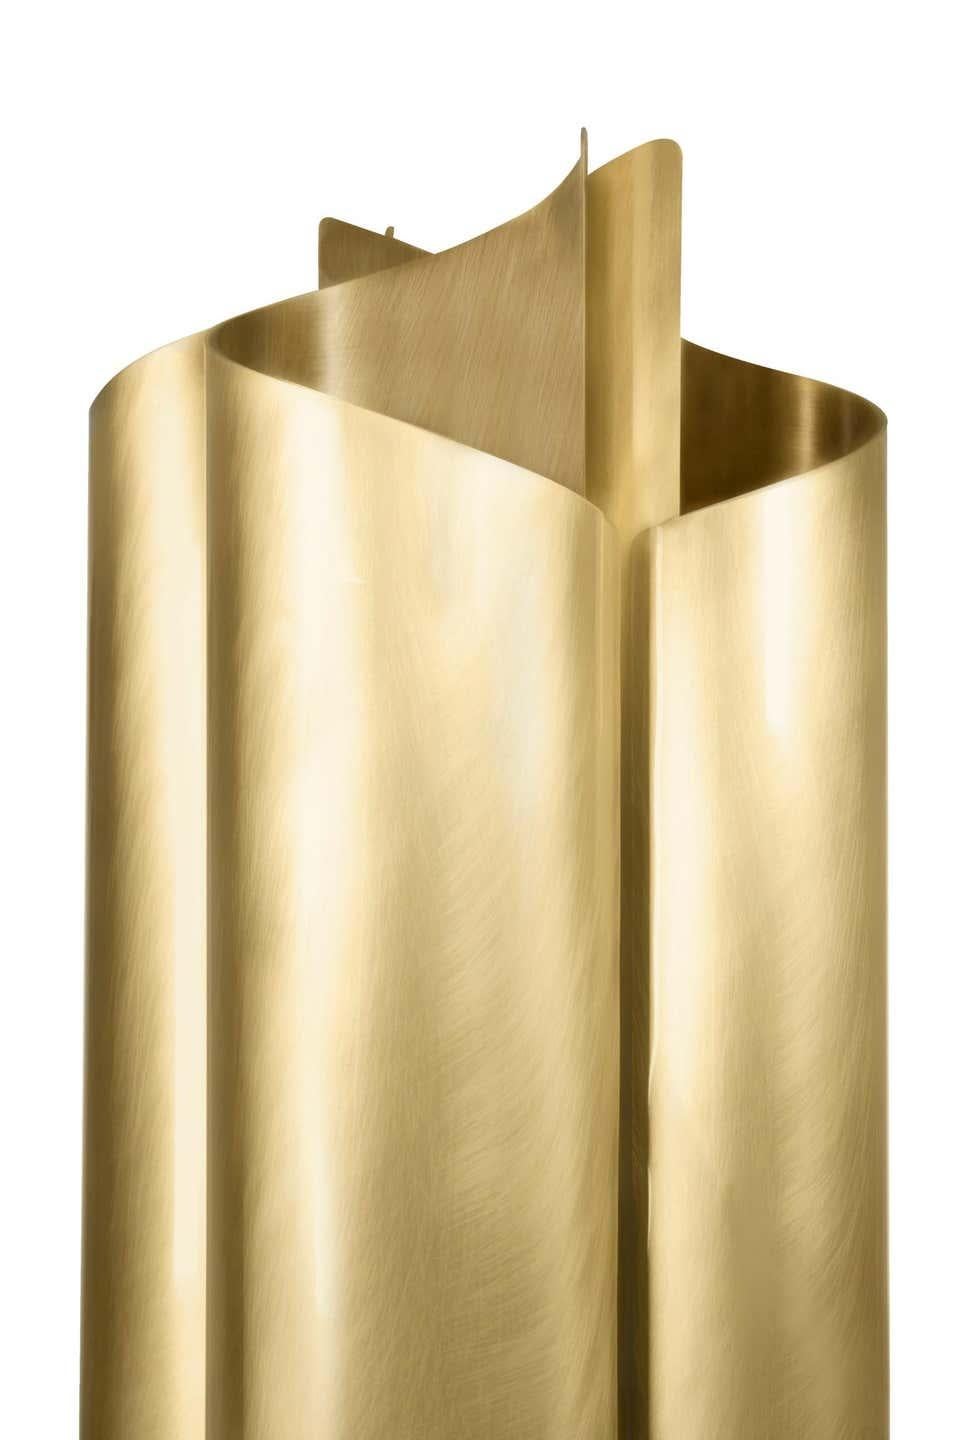 Floor lamp in polished brass

Custom sizes, materials and finishes.

An original furniture piece, made in polished brass. Luxurious, yet, sober and exquisite.
Glossy aged brushed brass.

Estimated production time: 8-9